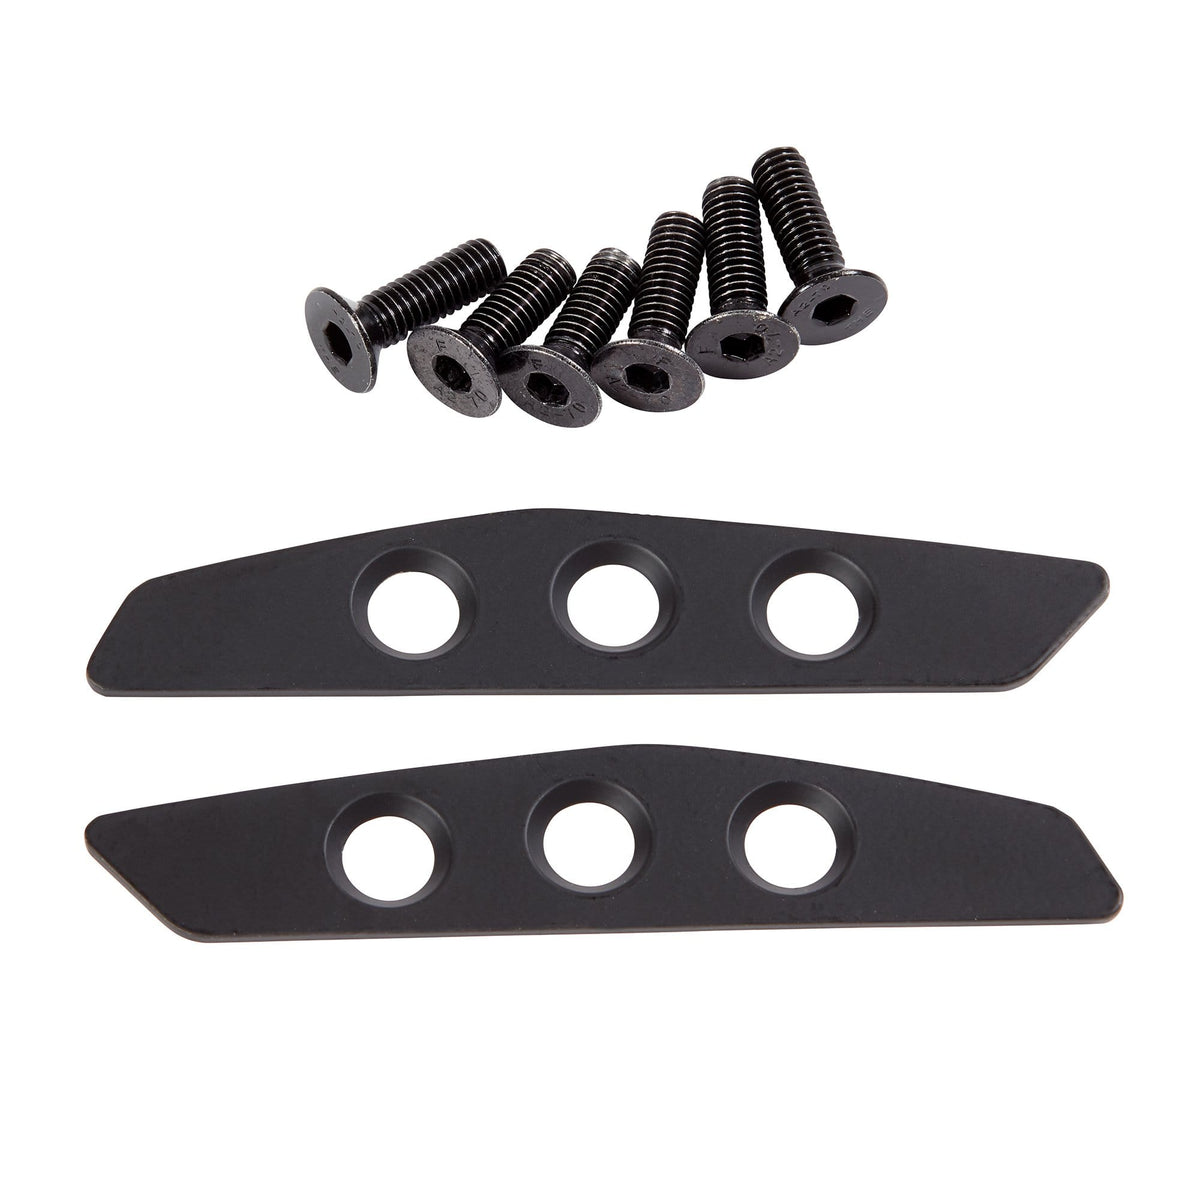 Boosted Replacement Battery Screws / Wings for Boosted Boards